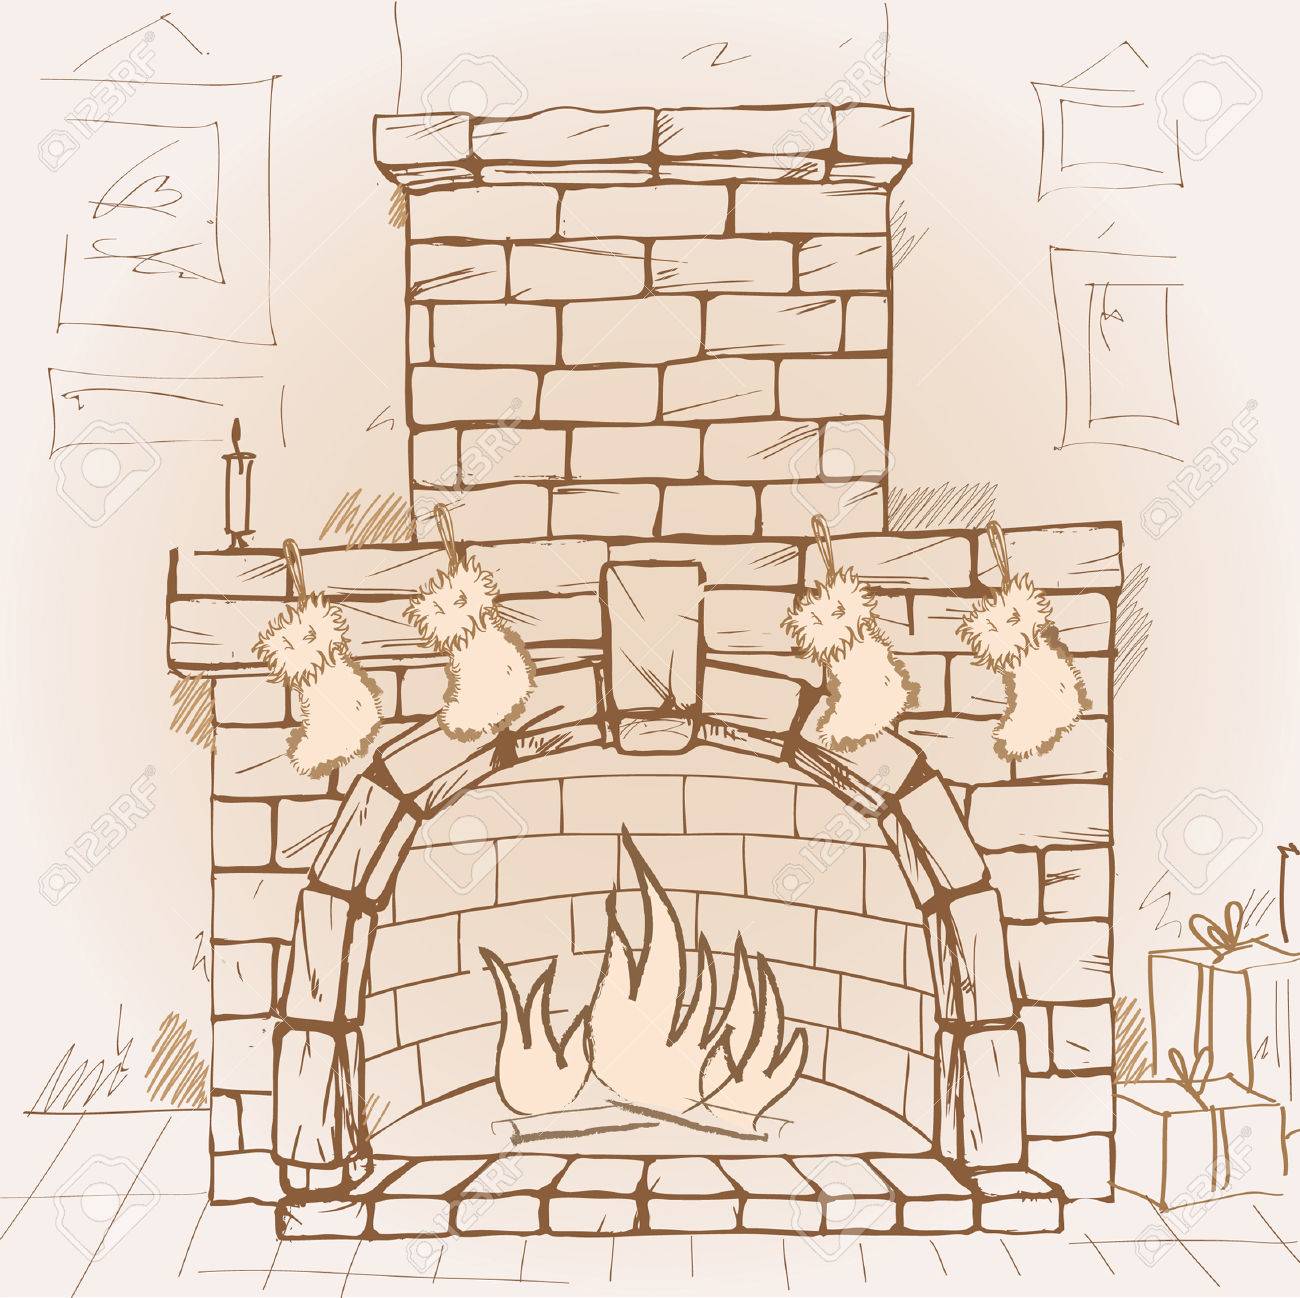 Fireplace Drawing With Stockings Free Wallpaper